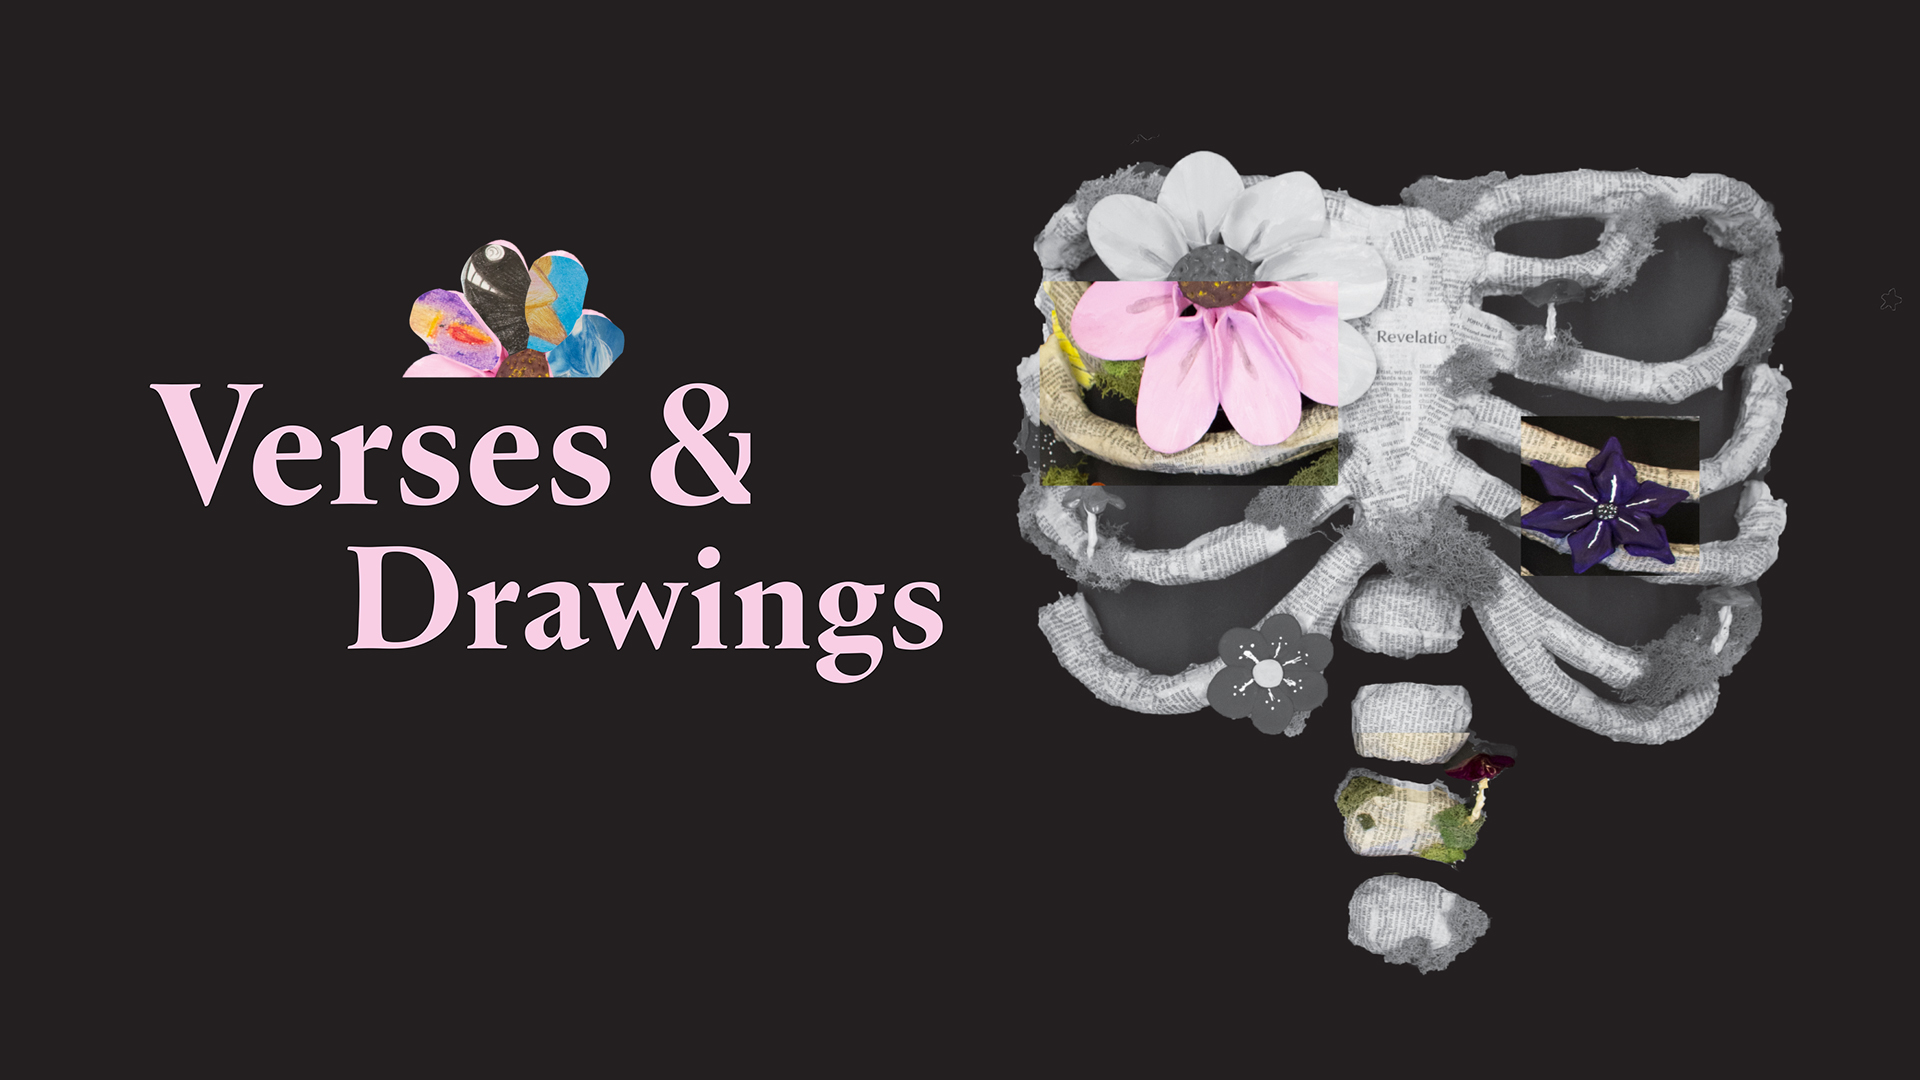 Verses and Drawings banner graphic depicting a skeletal rib cage with a flower